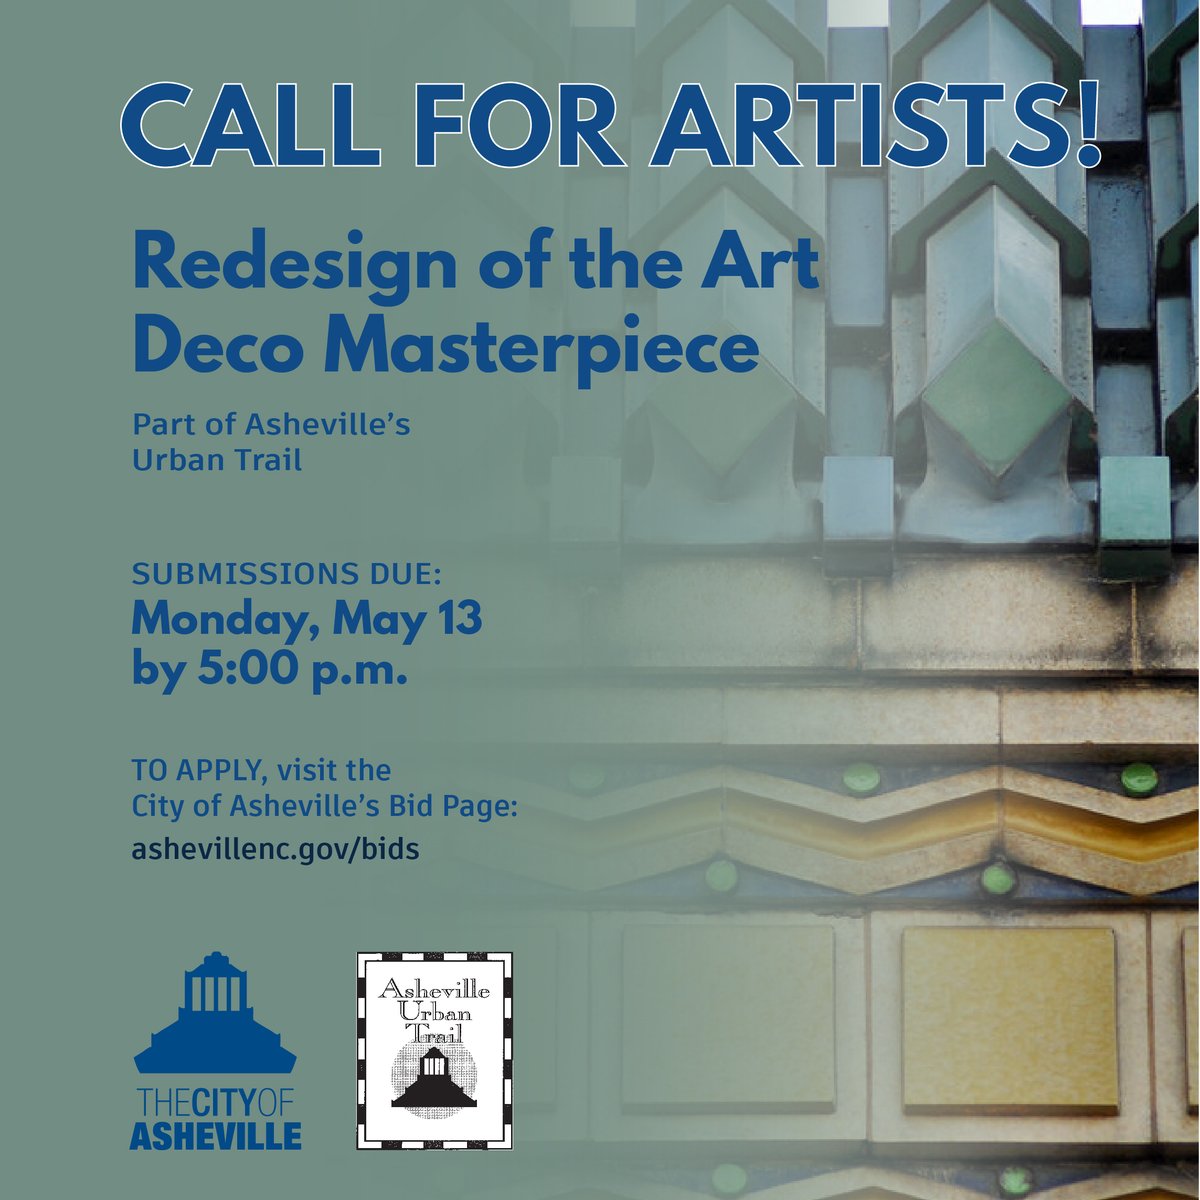 🎨 Artists wanted! Submit your qualifications to create a new Art Deco Masterpiece for Asheville’s Urban Trail. Access the Call for Artists document: ashevillenc.gov/bids. #Asheville #CallForArtists